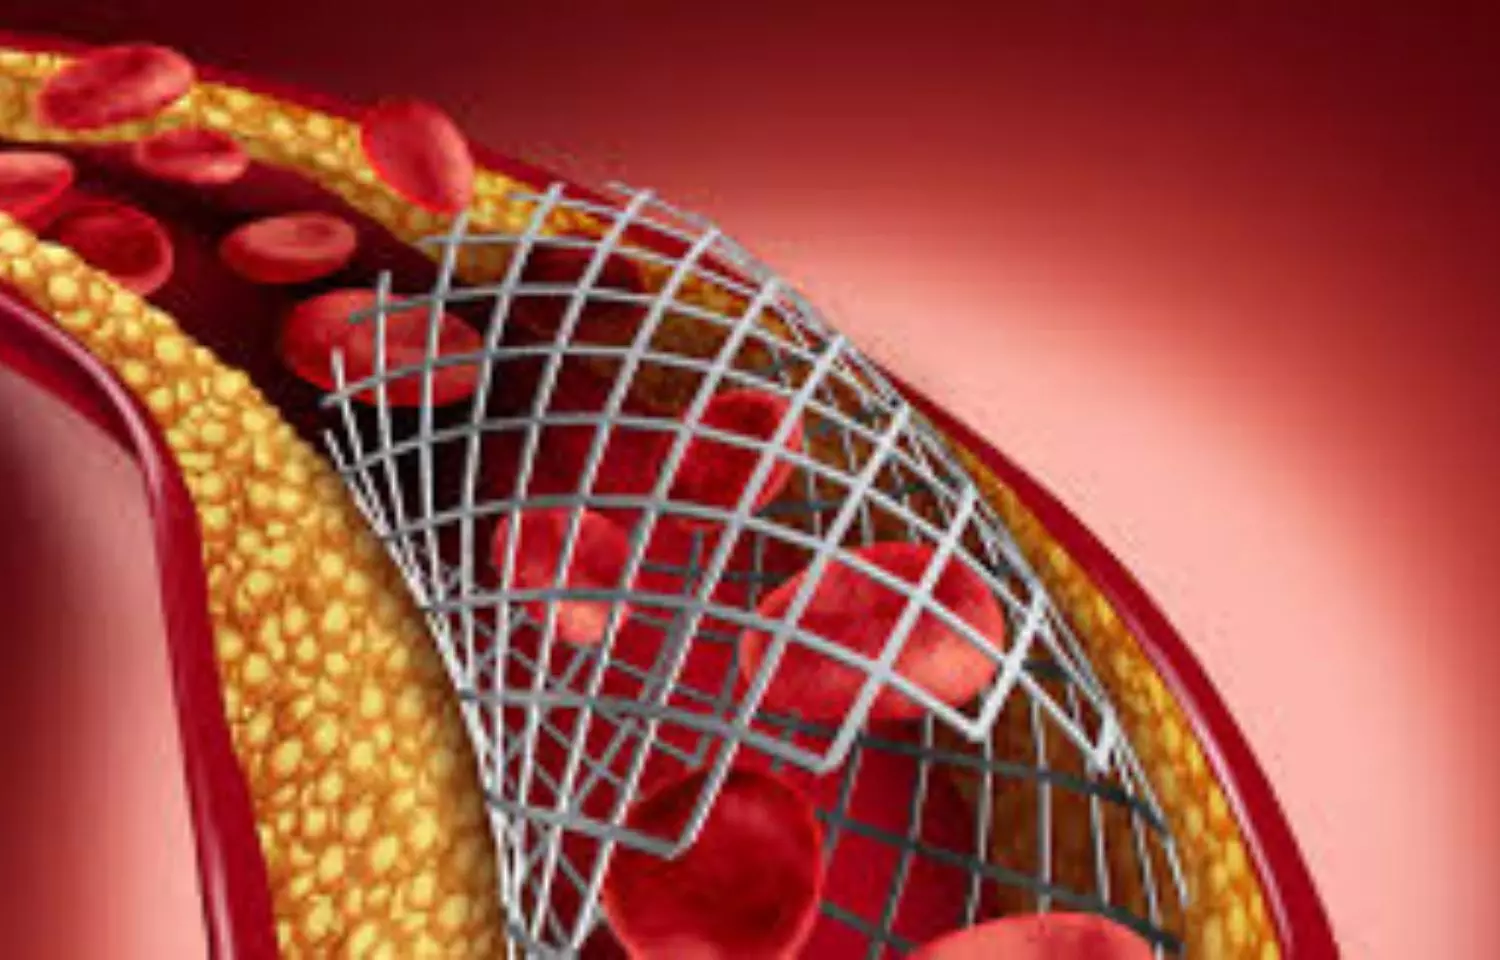 Two-stent strategies of no benefit over provisional stenting for PCI: JAHA